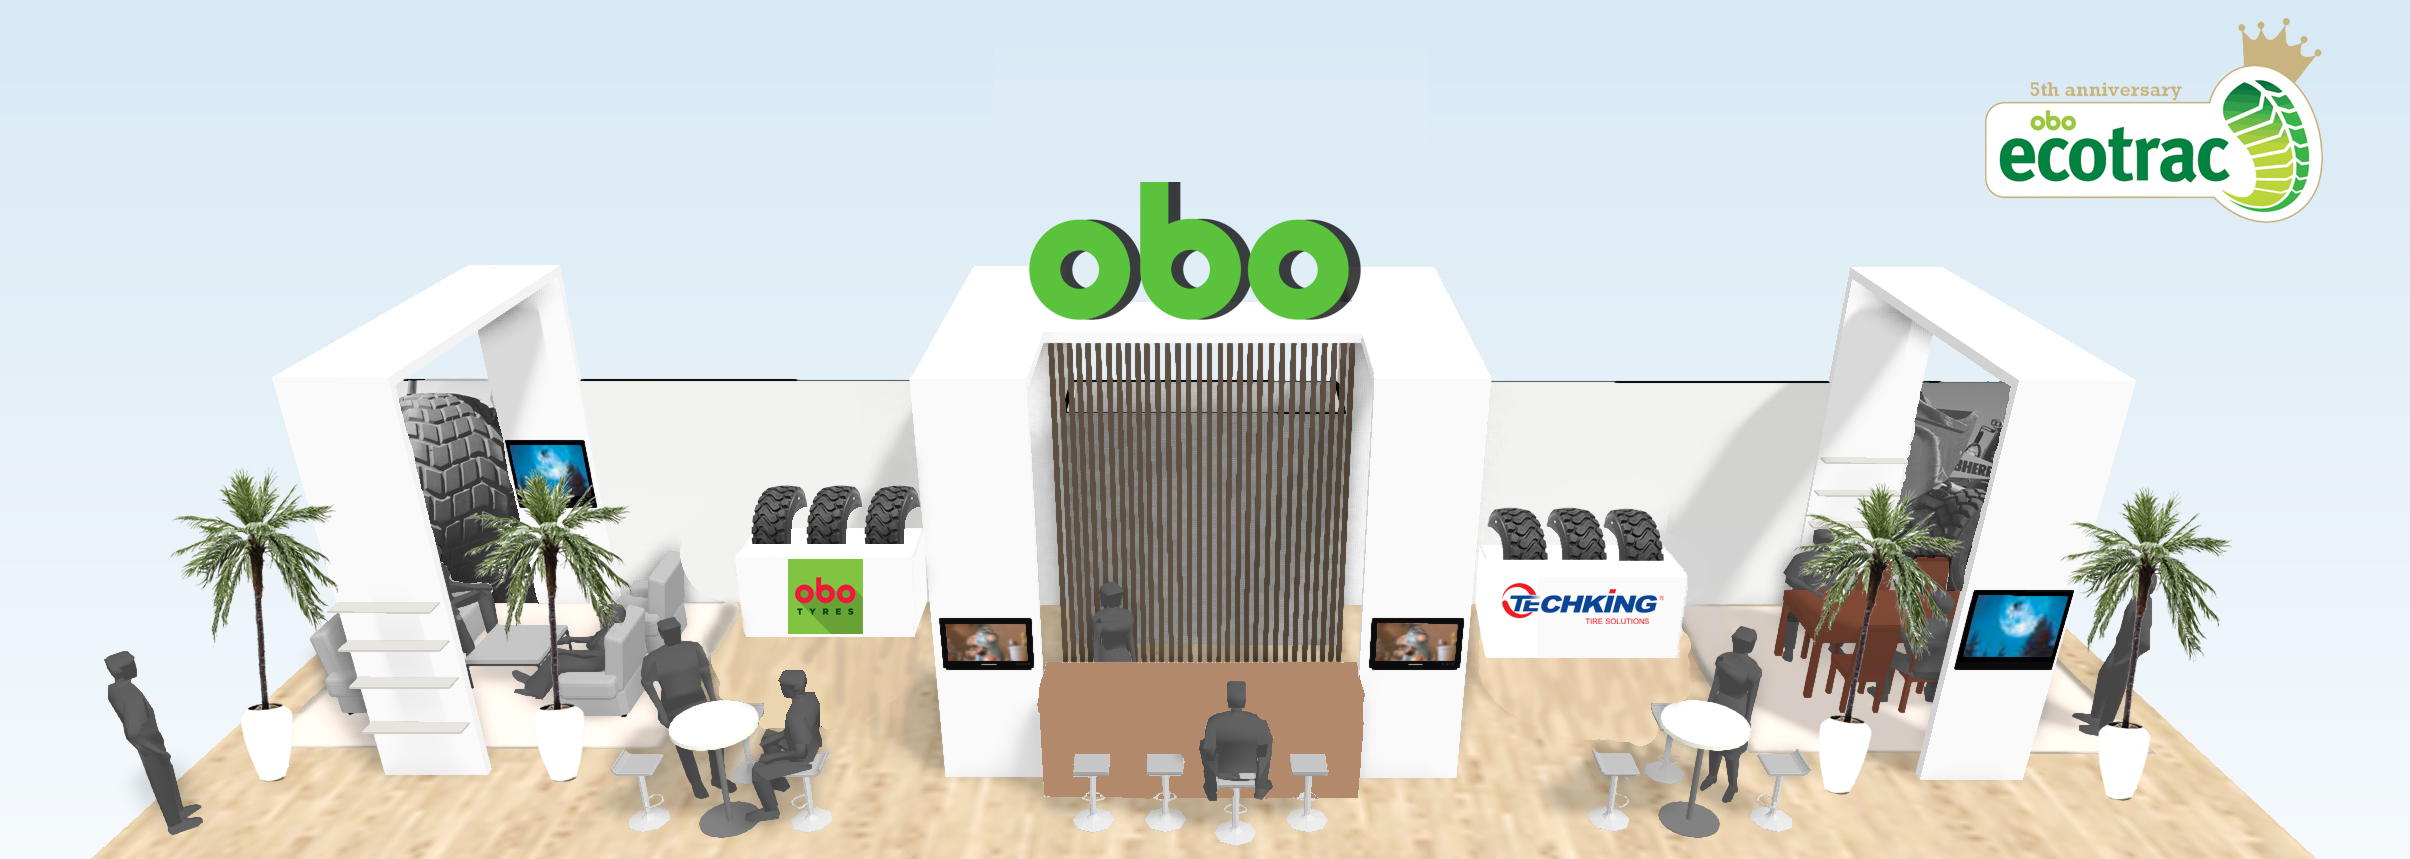 OBO encourages Reifen visitors to relax at beach-themed tyre sustainability stand